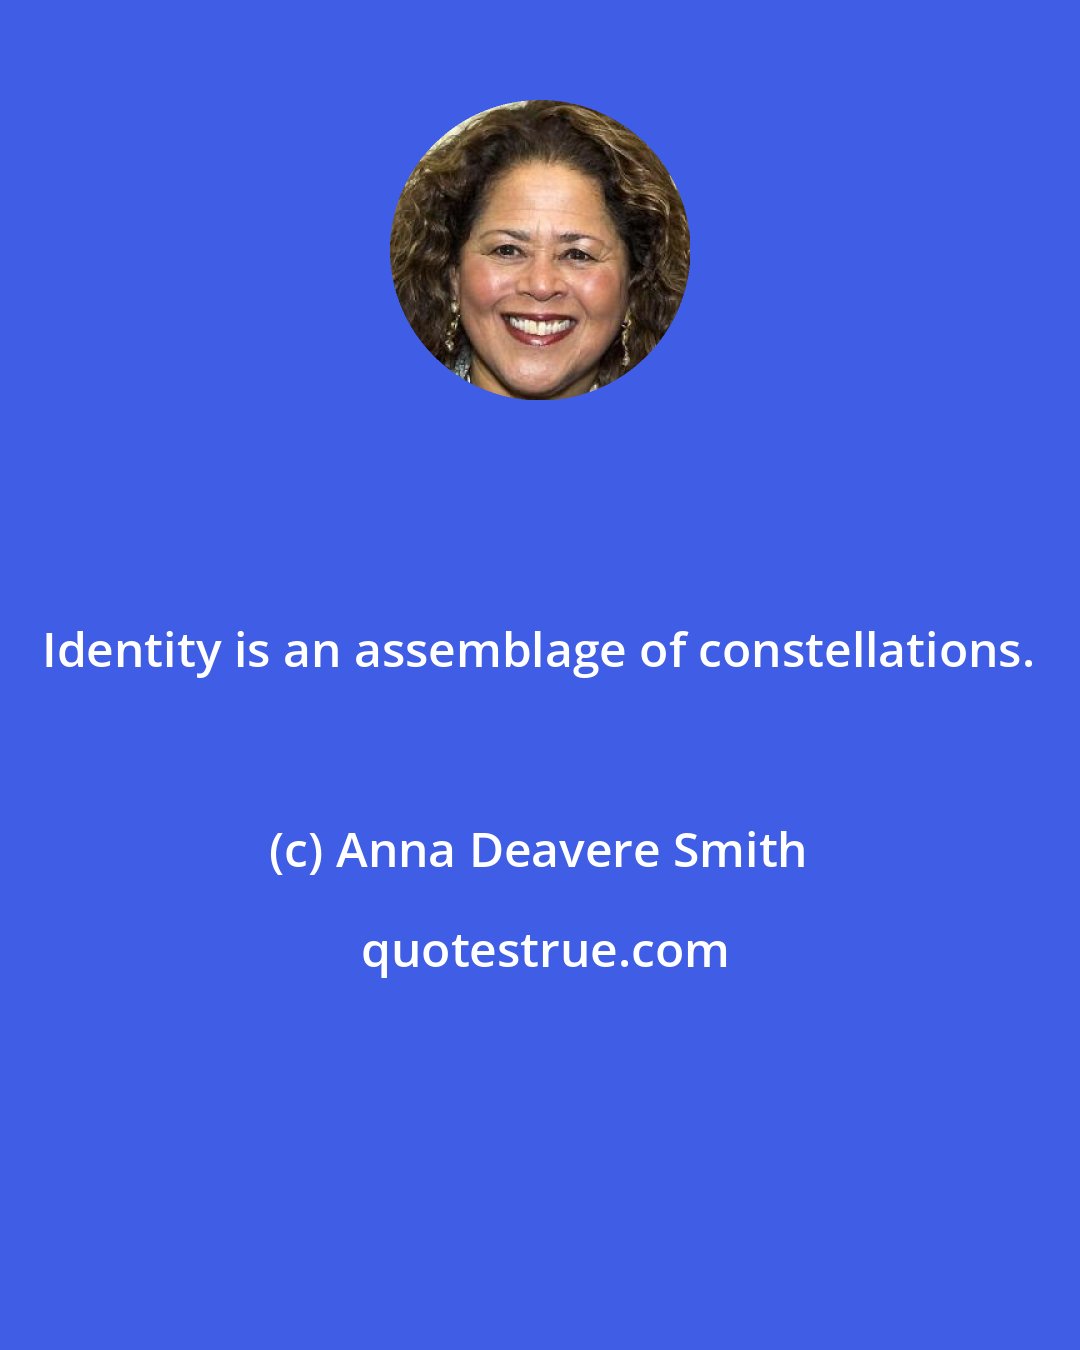 Anna Deavere Smith: Identity is an assemblage of constellations.